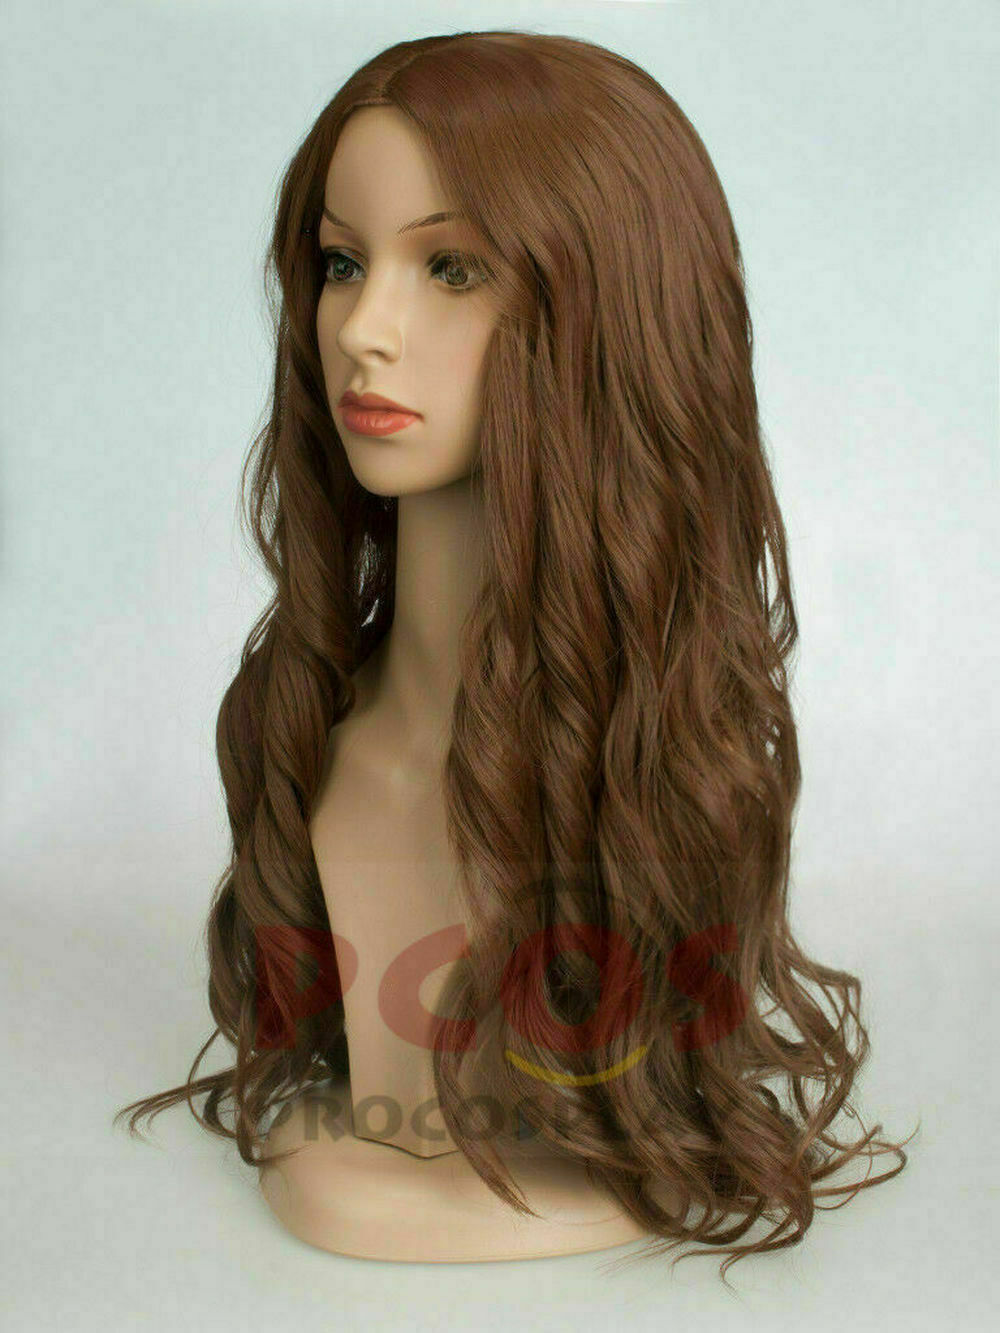 Avengers 3 Wanda Maximoff cosplay hairs Scarlet Witch cosplay Wavy wigs@